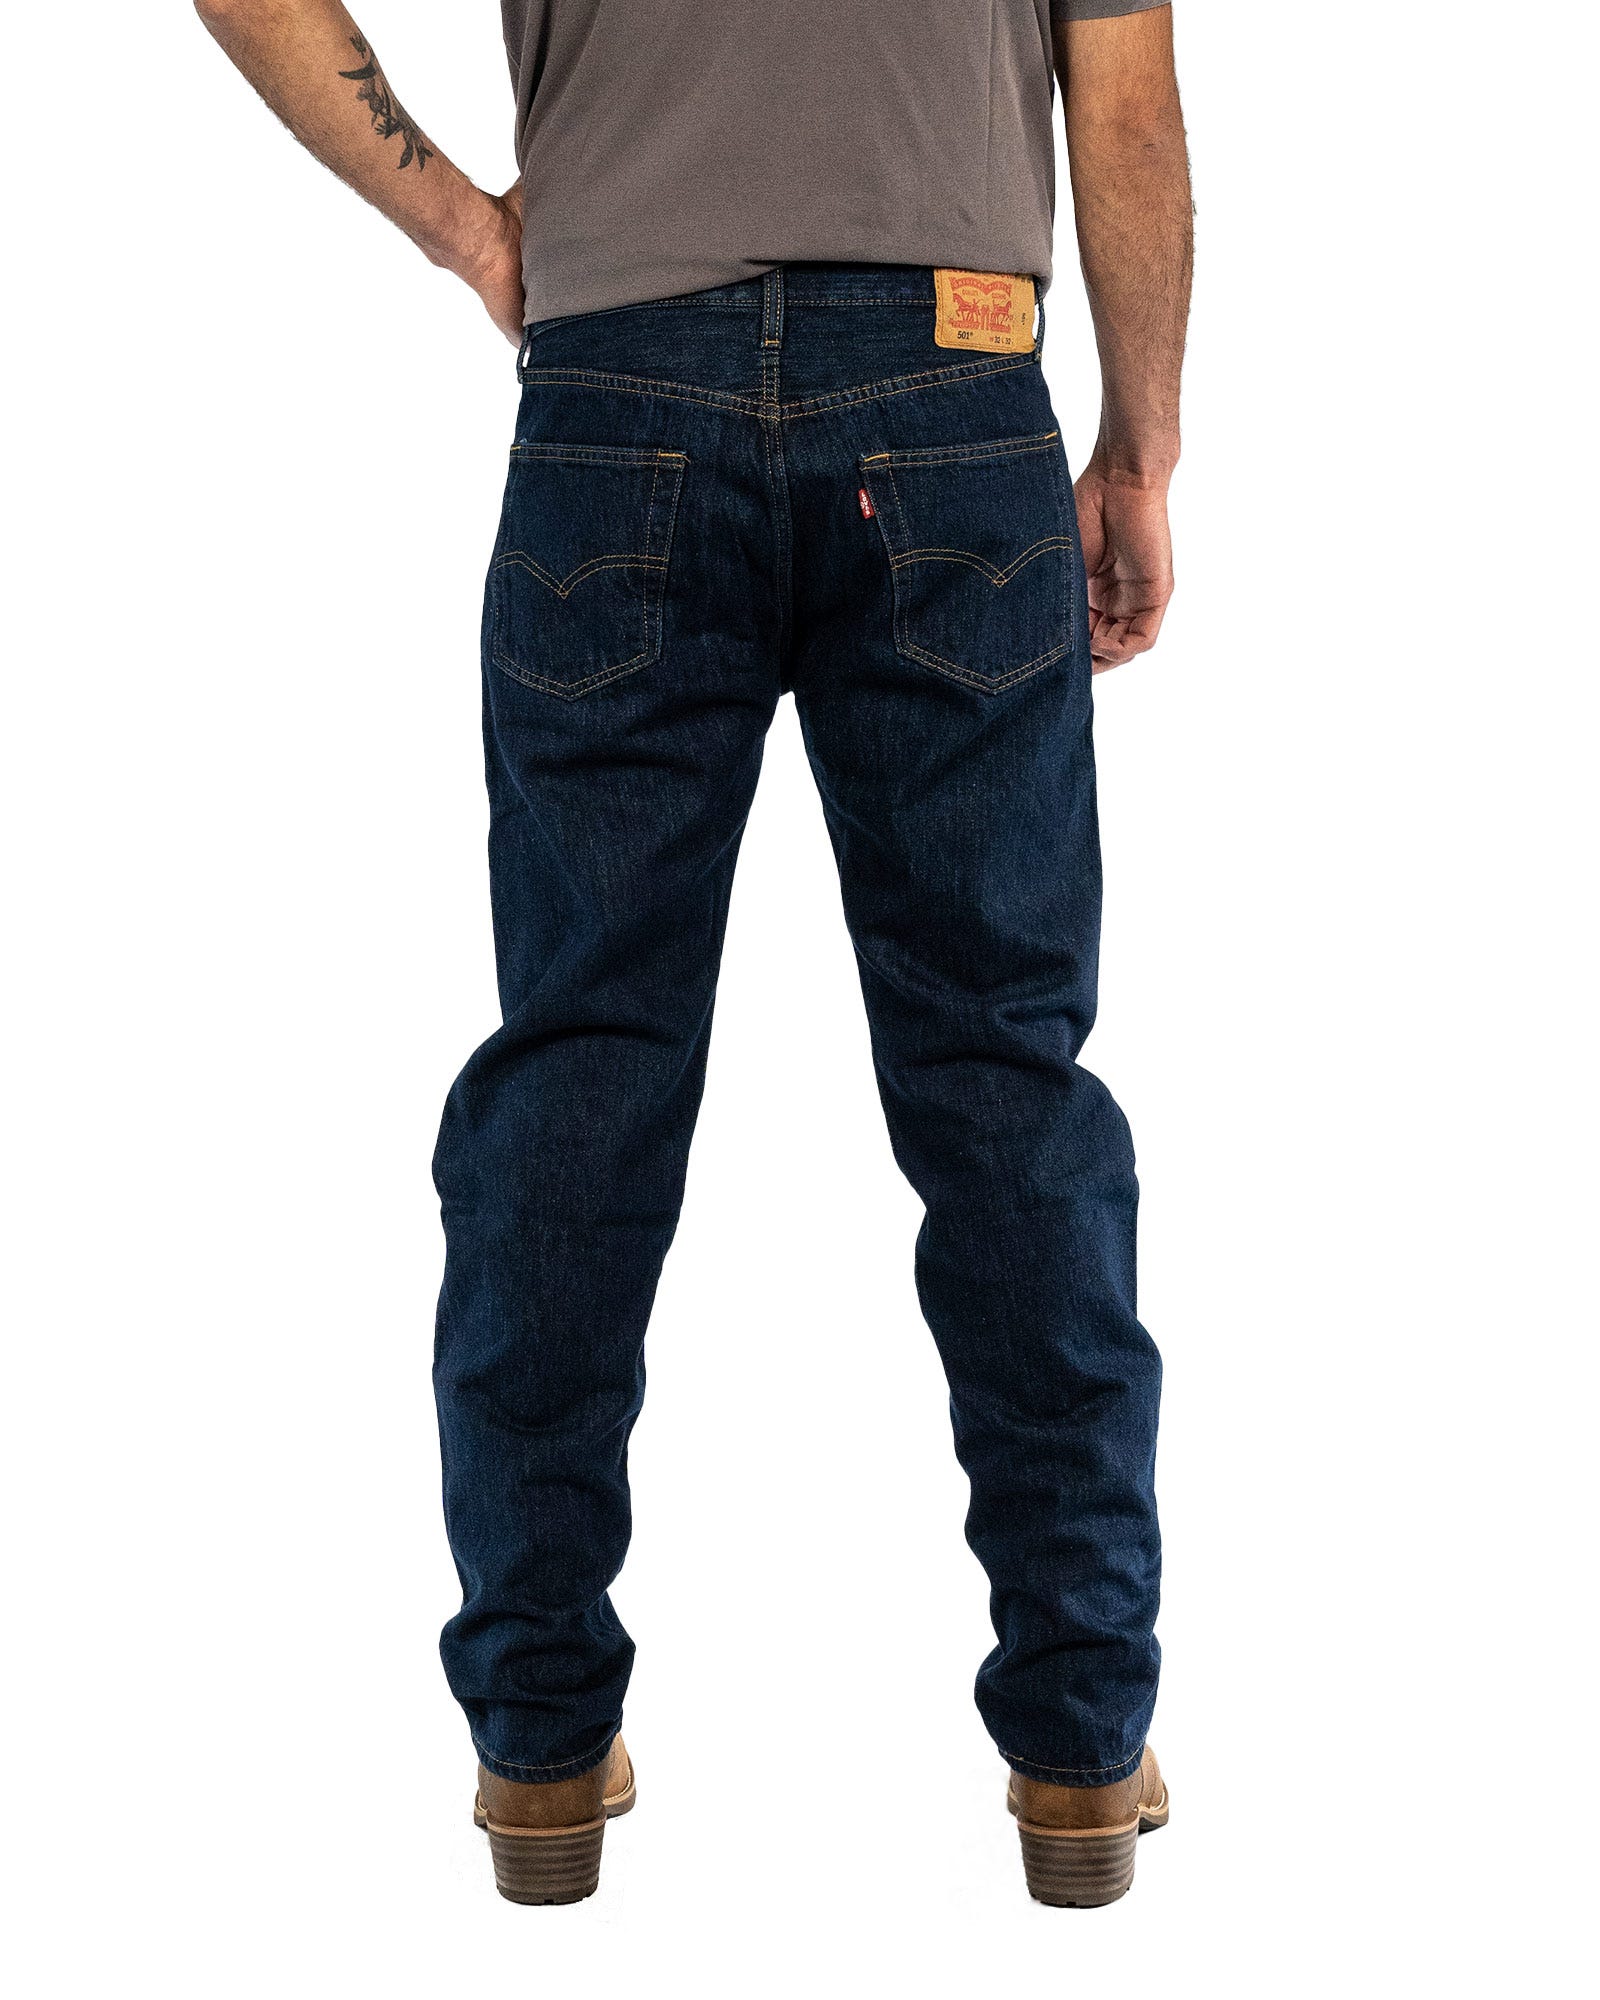 A back view of the Levi's 501 jeans